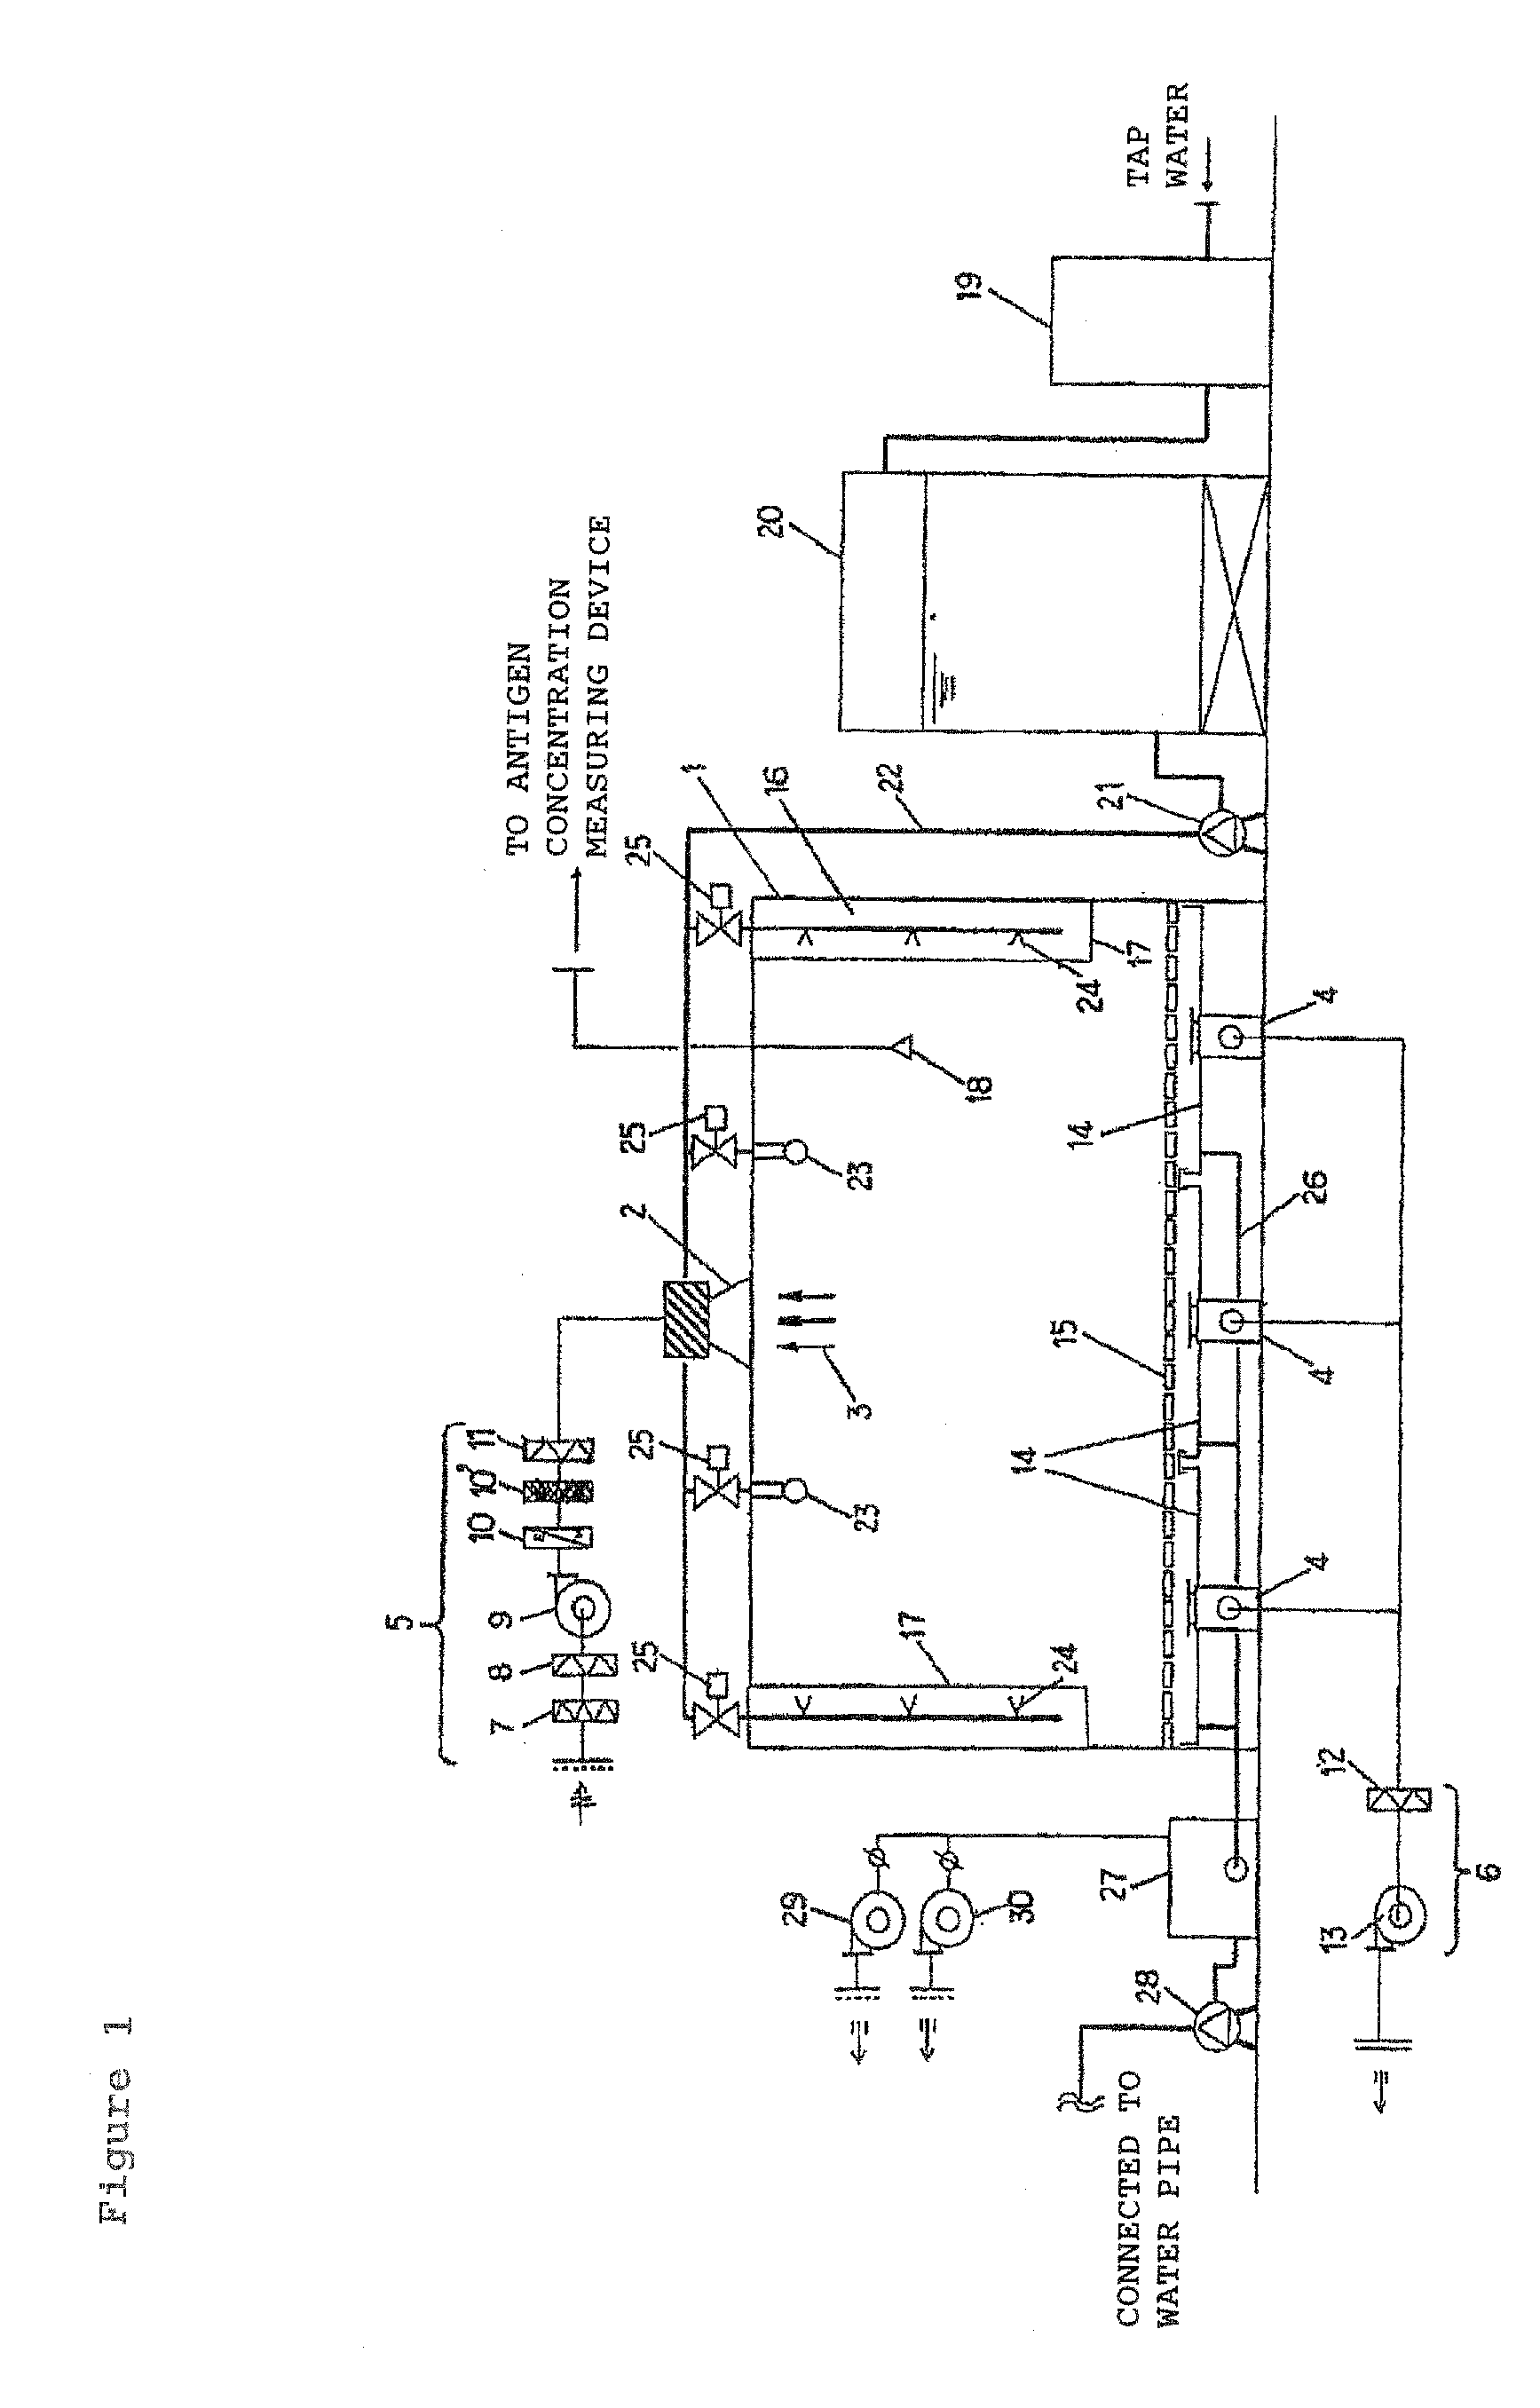 Antigen exposure chamber and method of cleaning and drying the same